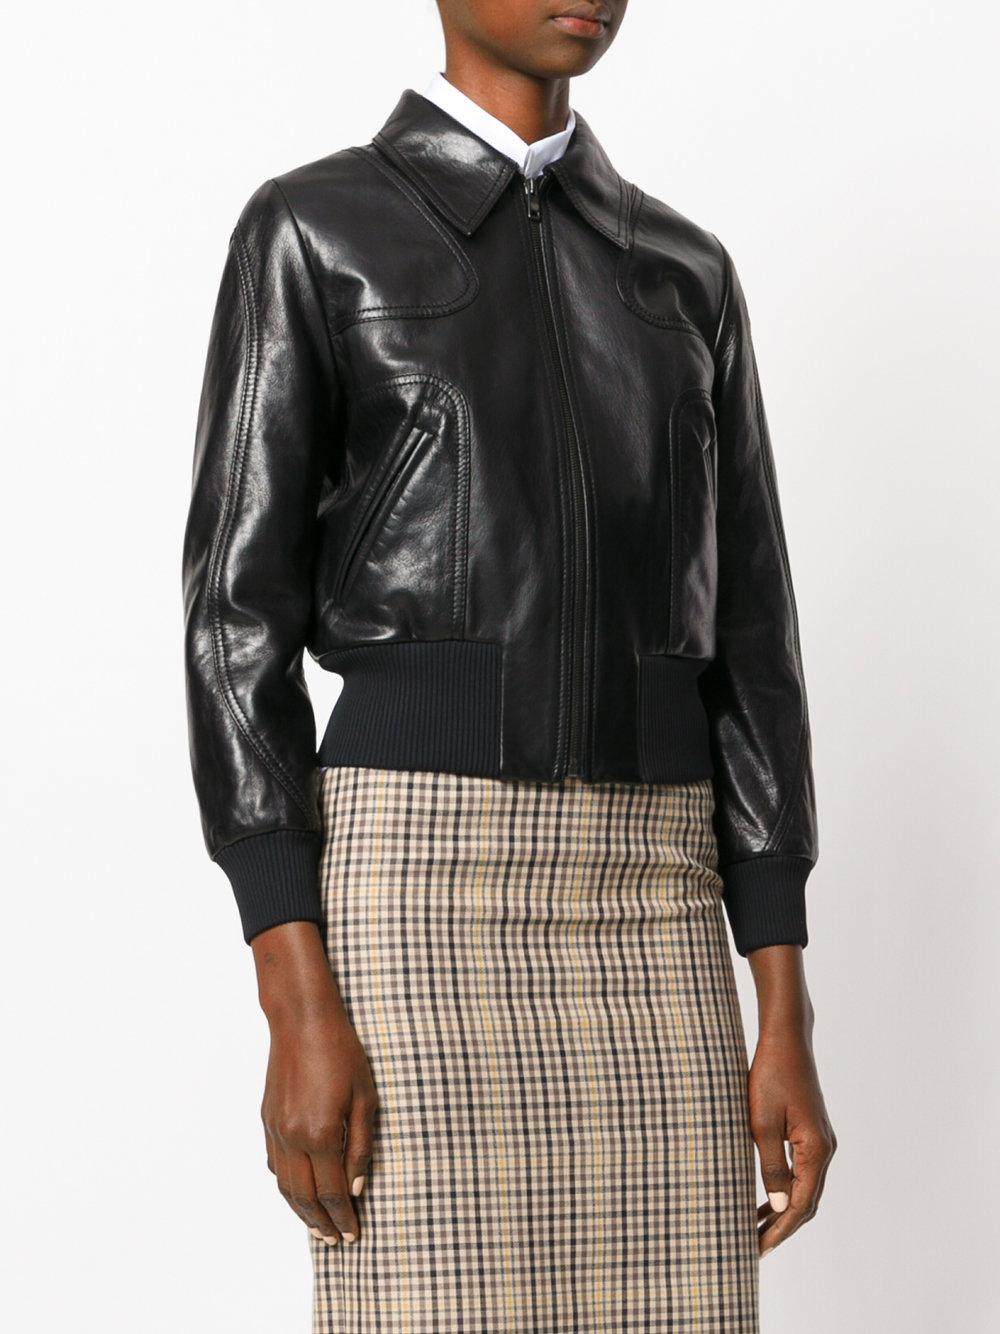 Prada Leather Cropped Bomber Jacket in Black - Lyst